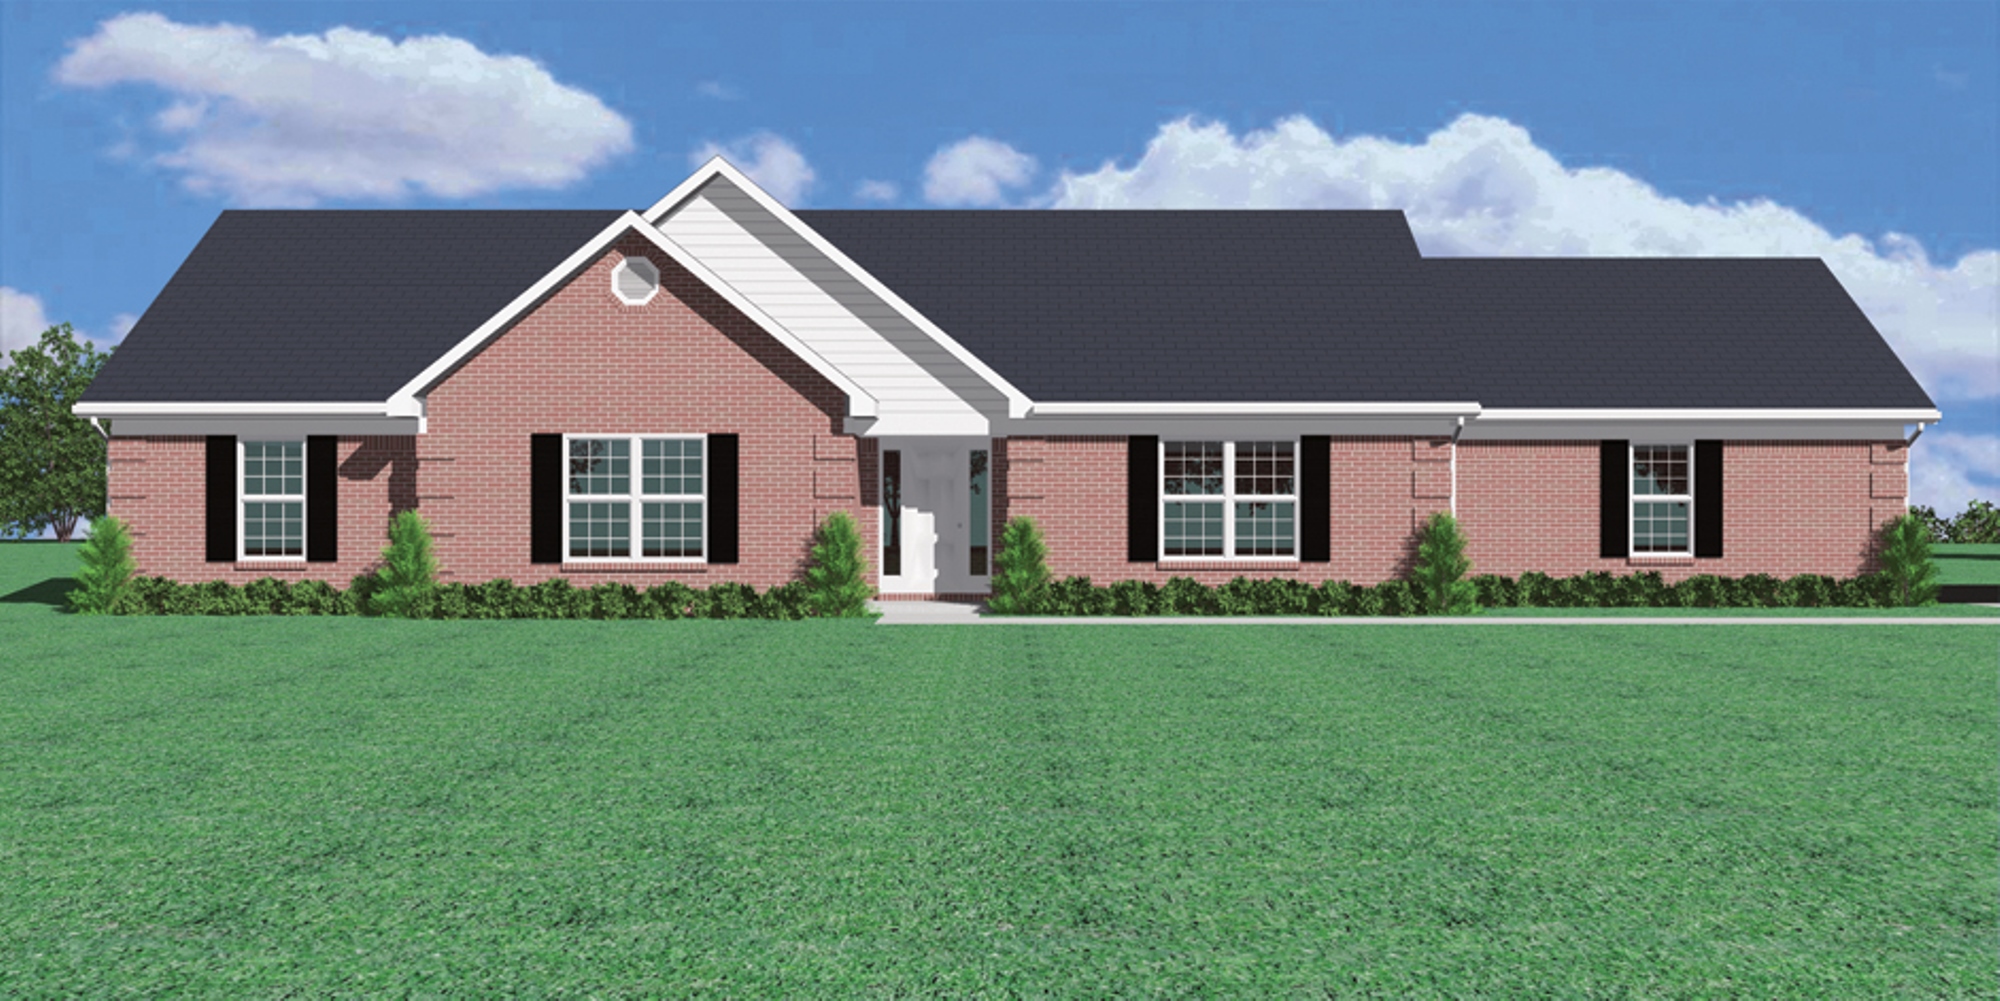 Tennessee One Story Home Designs Ballantrae